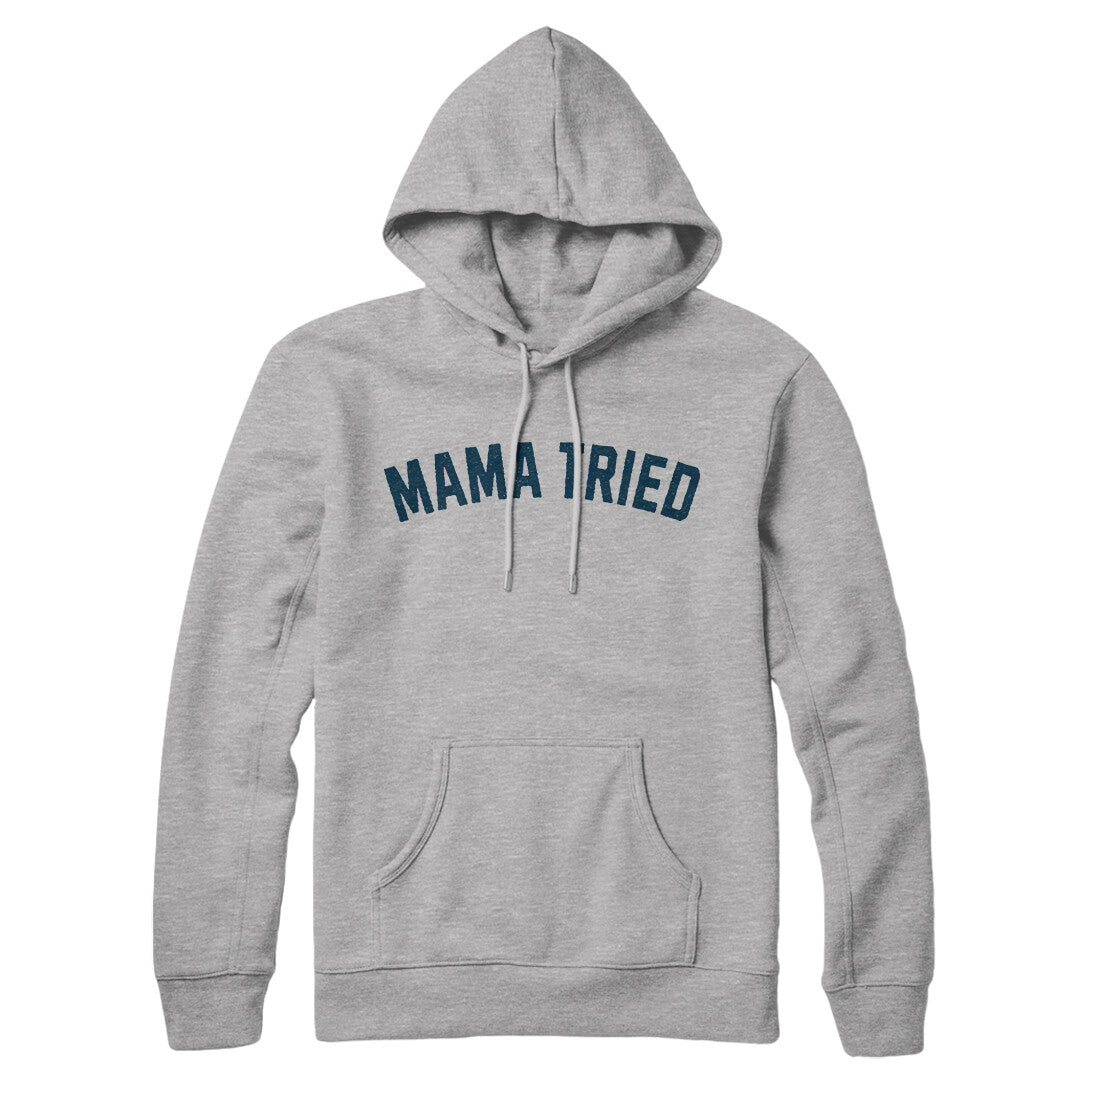 Mama Tried in Heather Grey Color